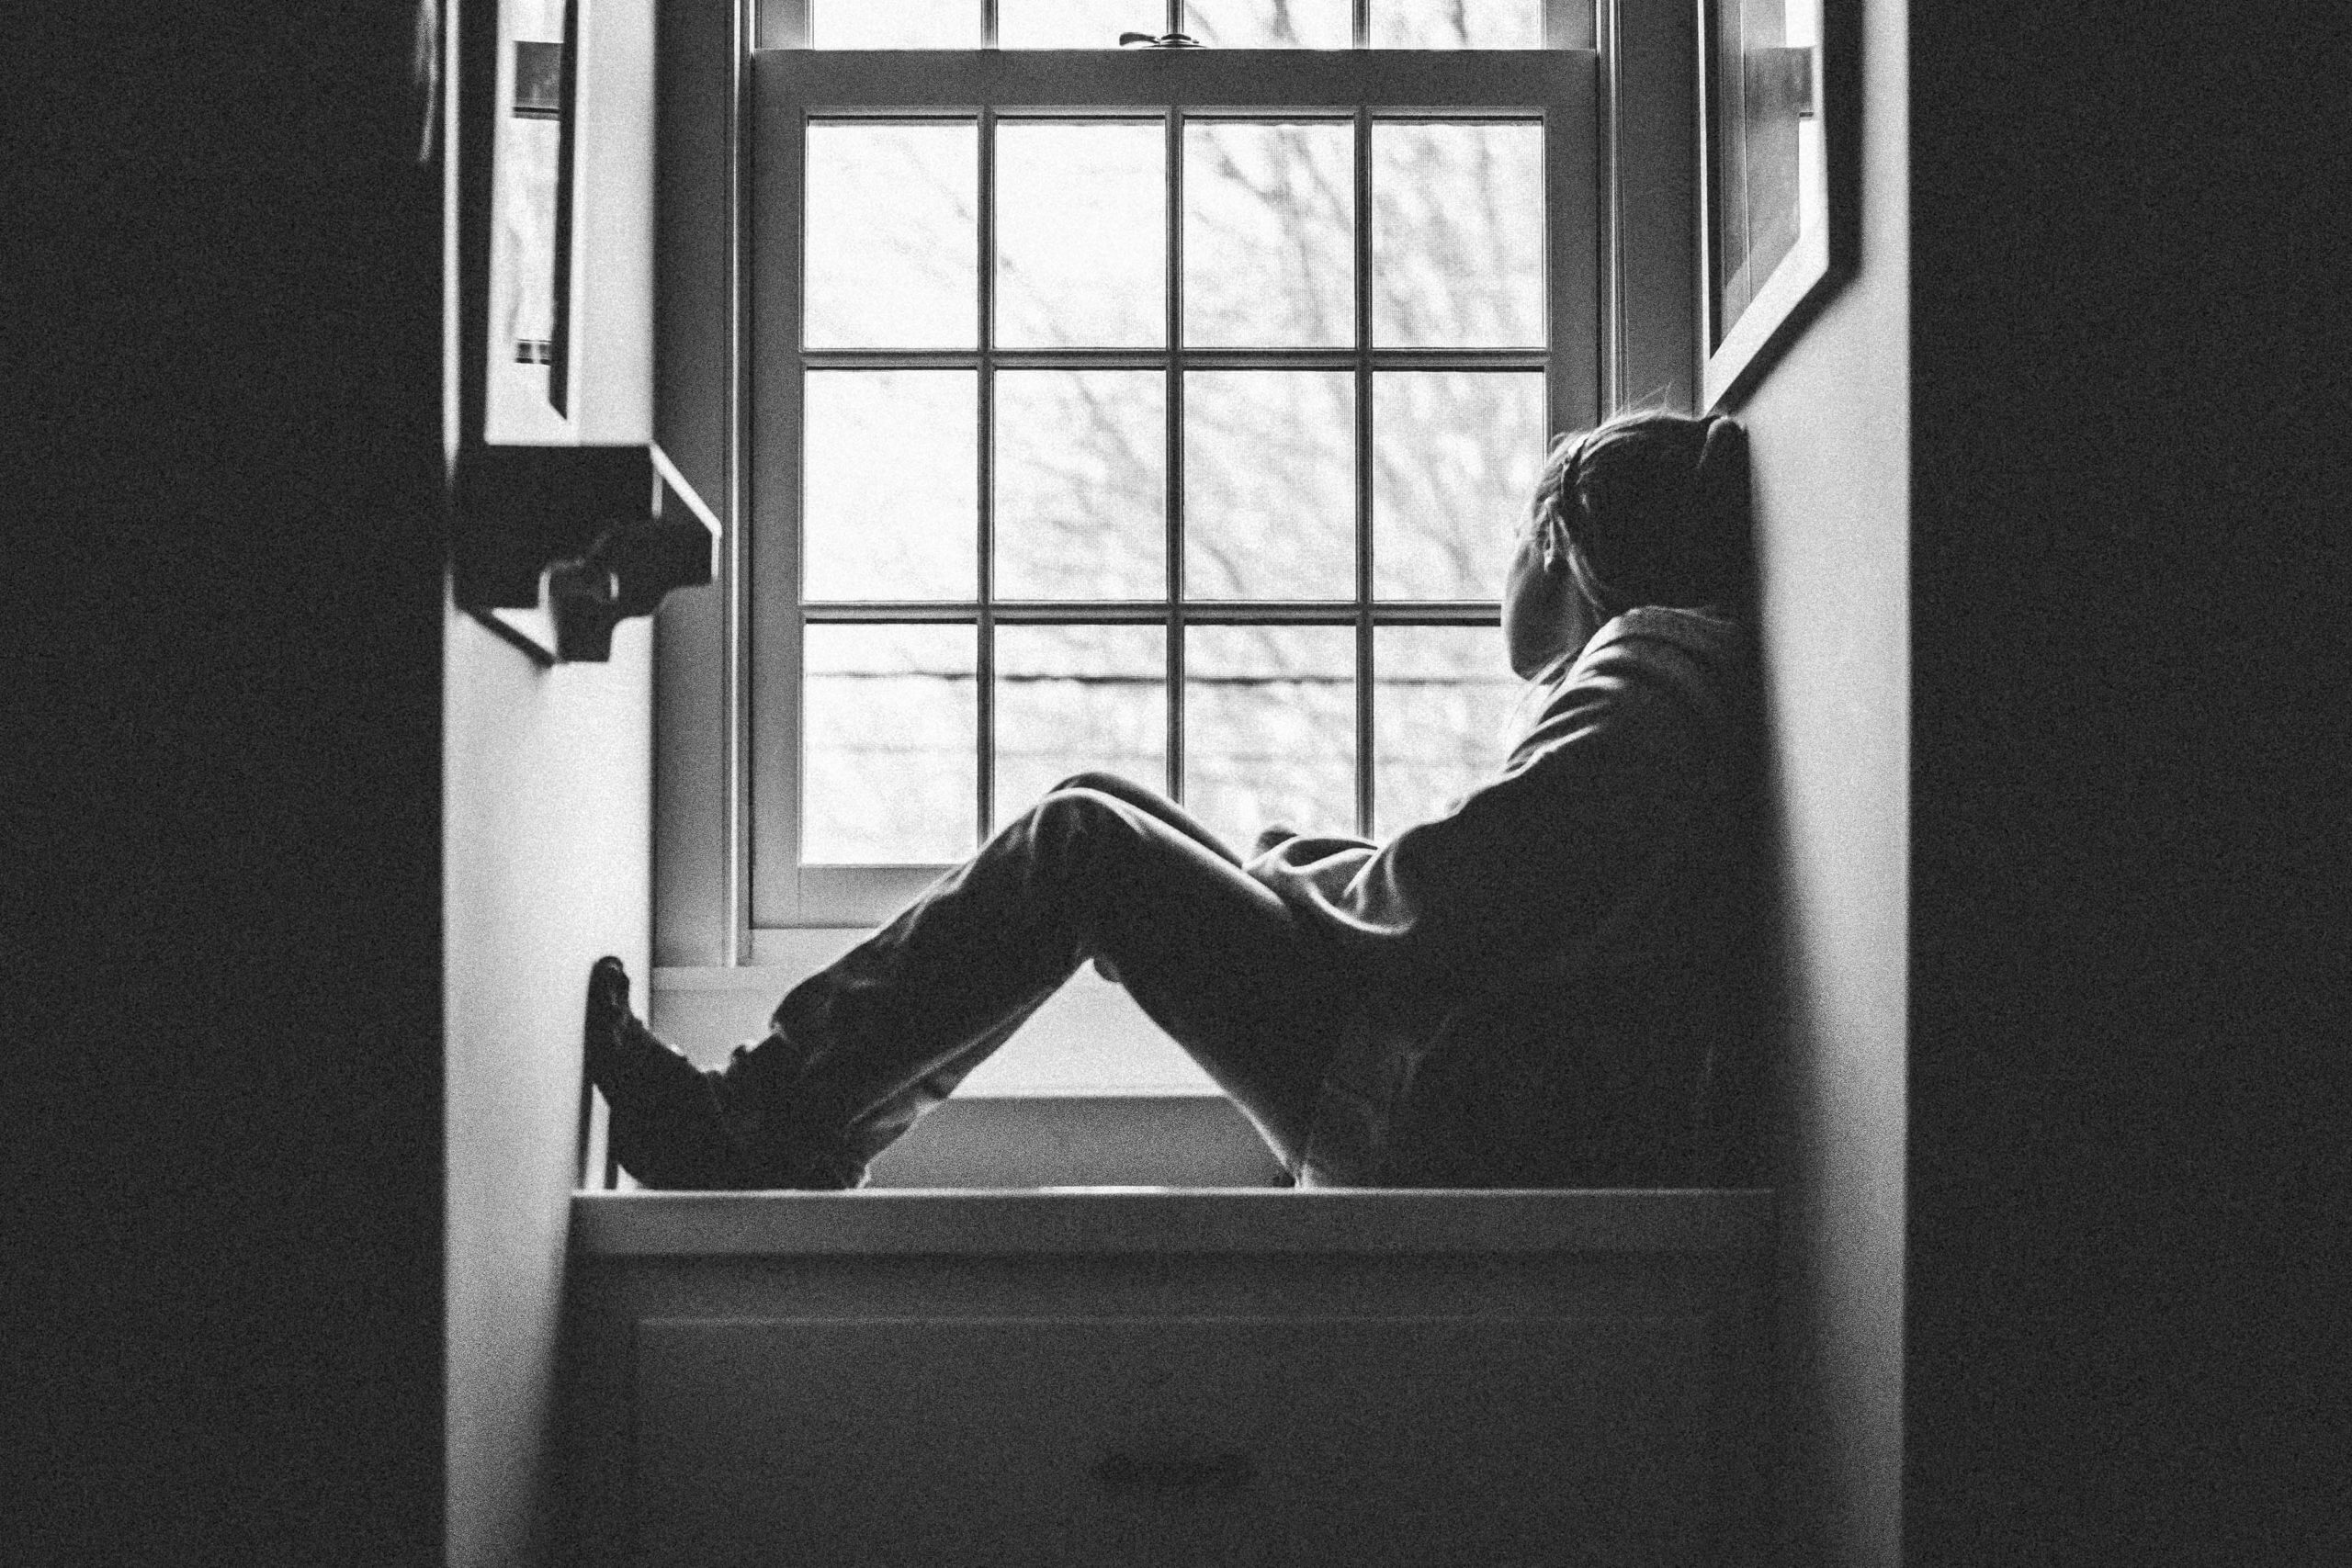 Black and white image of a white tween girl sitting on a window seat looking out the window.